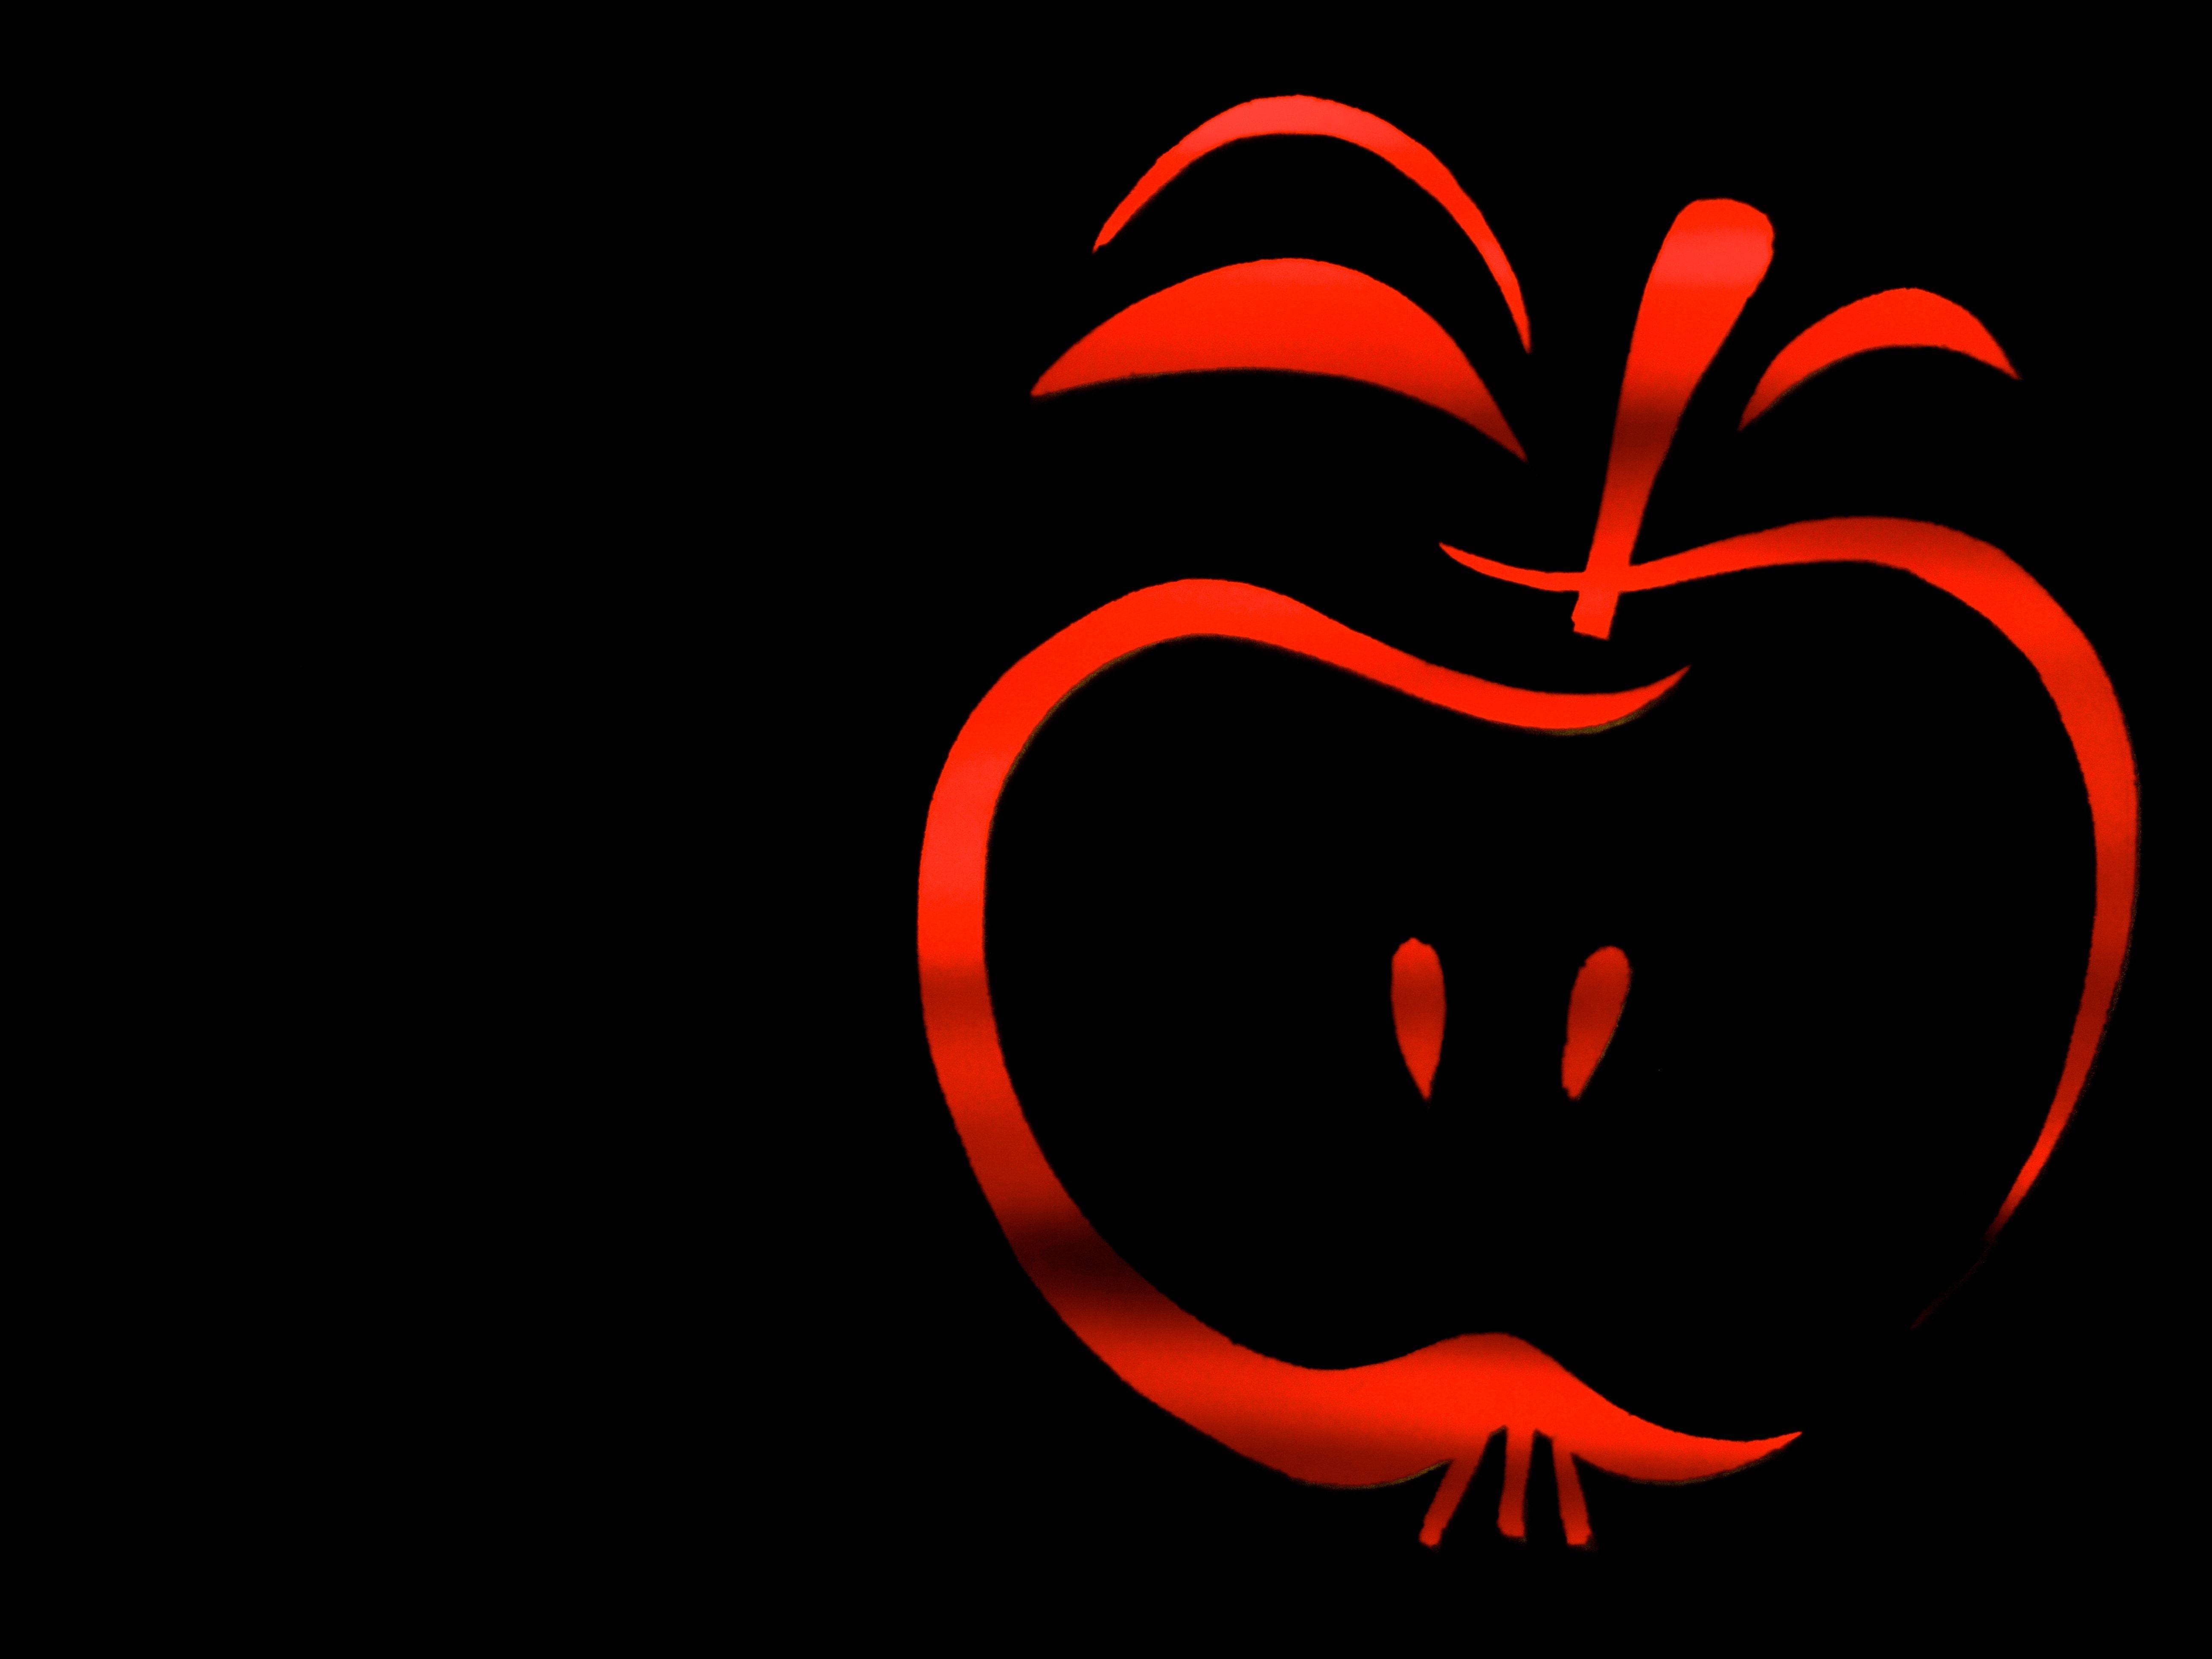 Red and Black Apple Logo - red apple logo free image | Peakpx